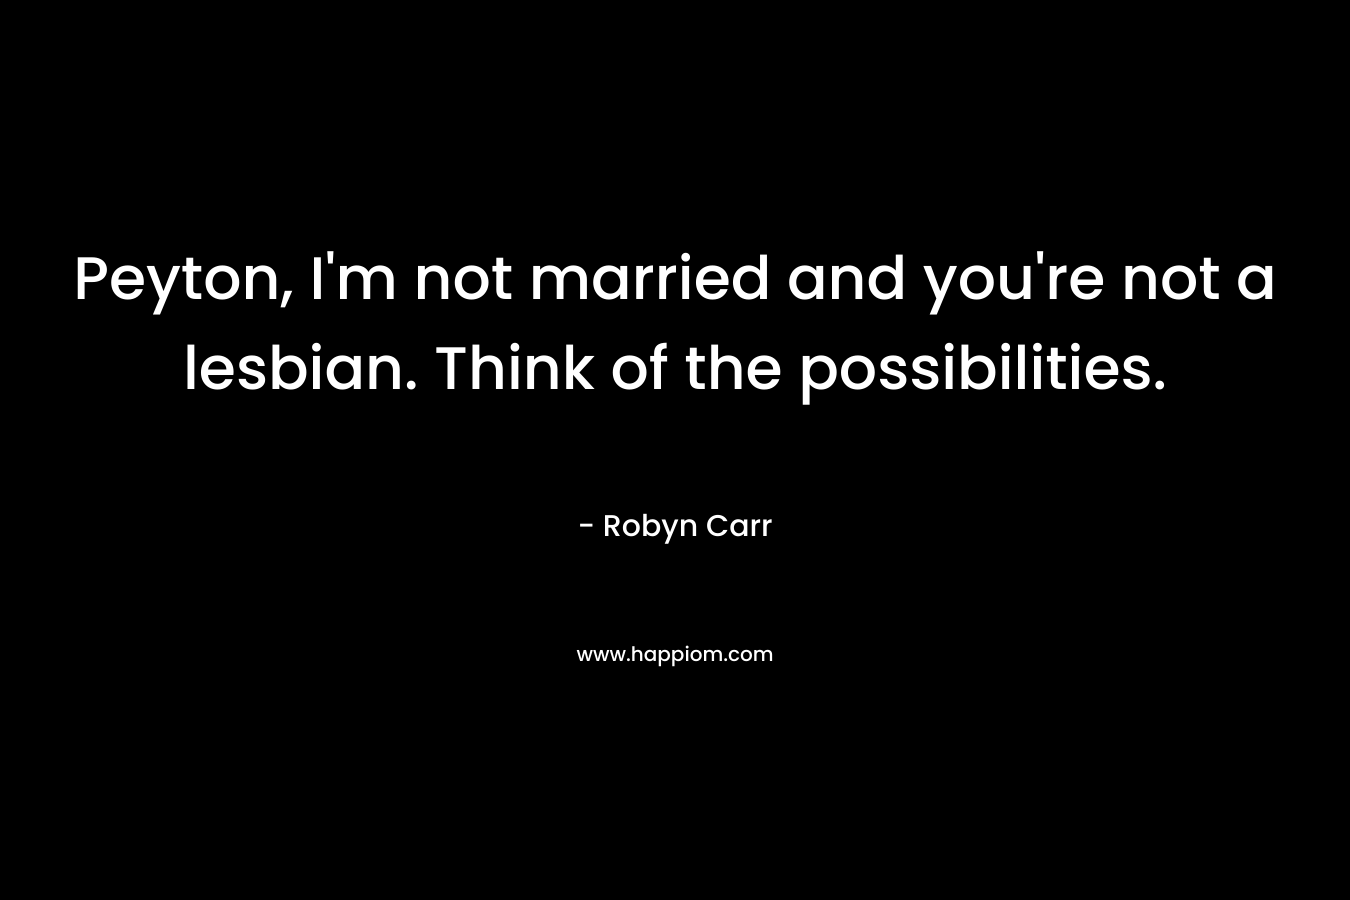 Peyton, I’m not married and you’re not a lesbian. Think of the possibilities. – Robyn Carr